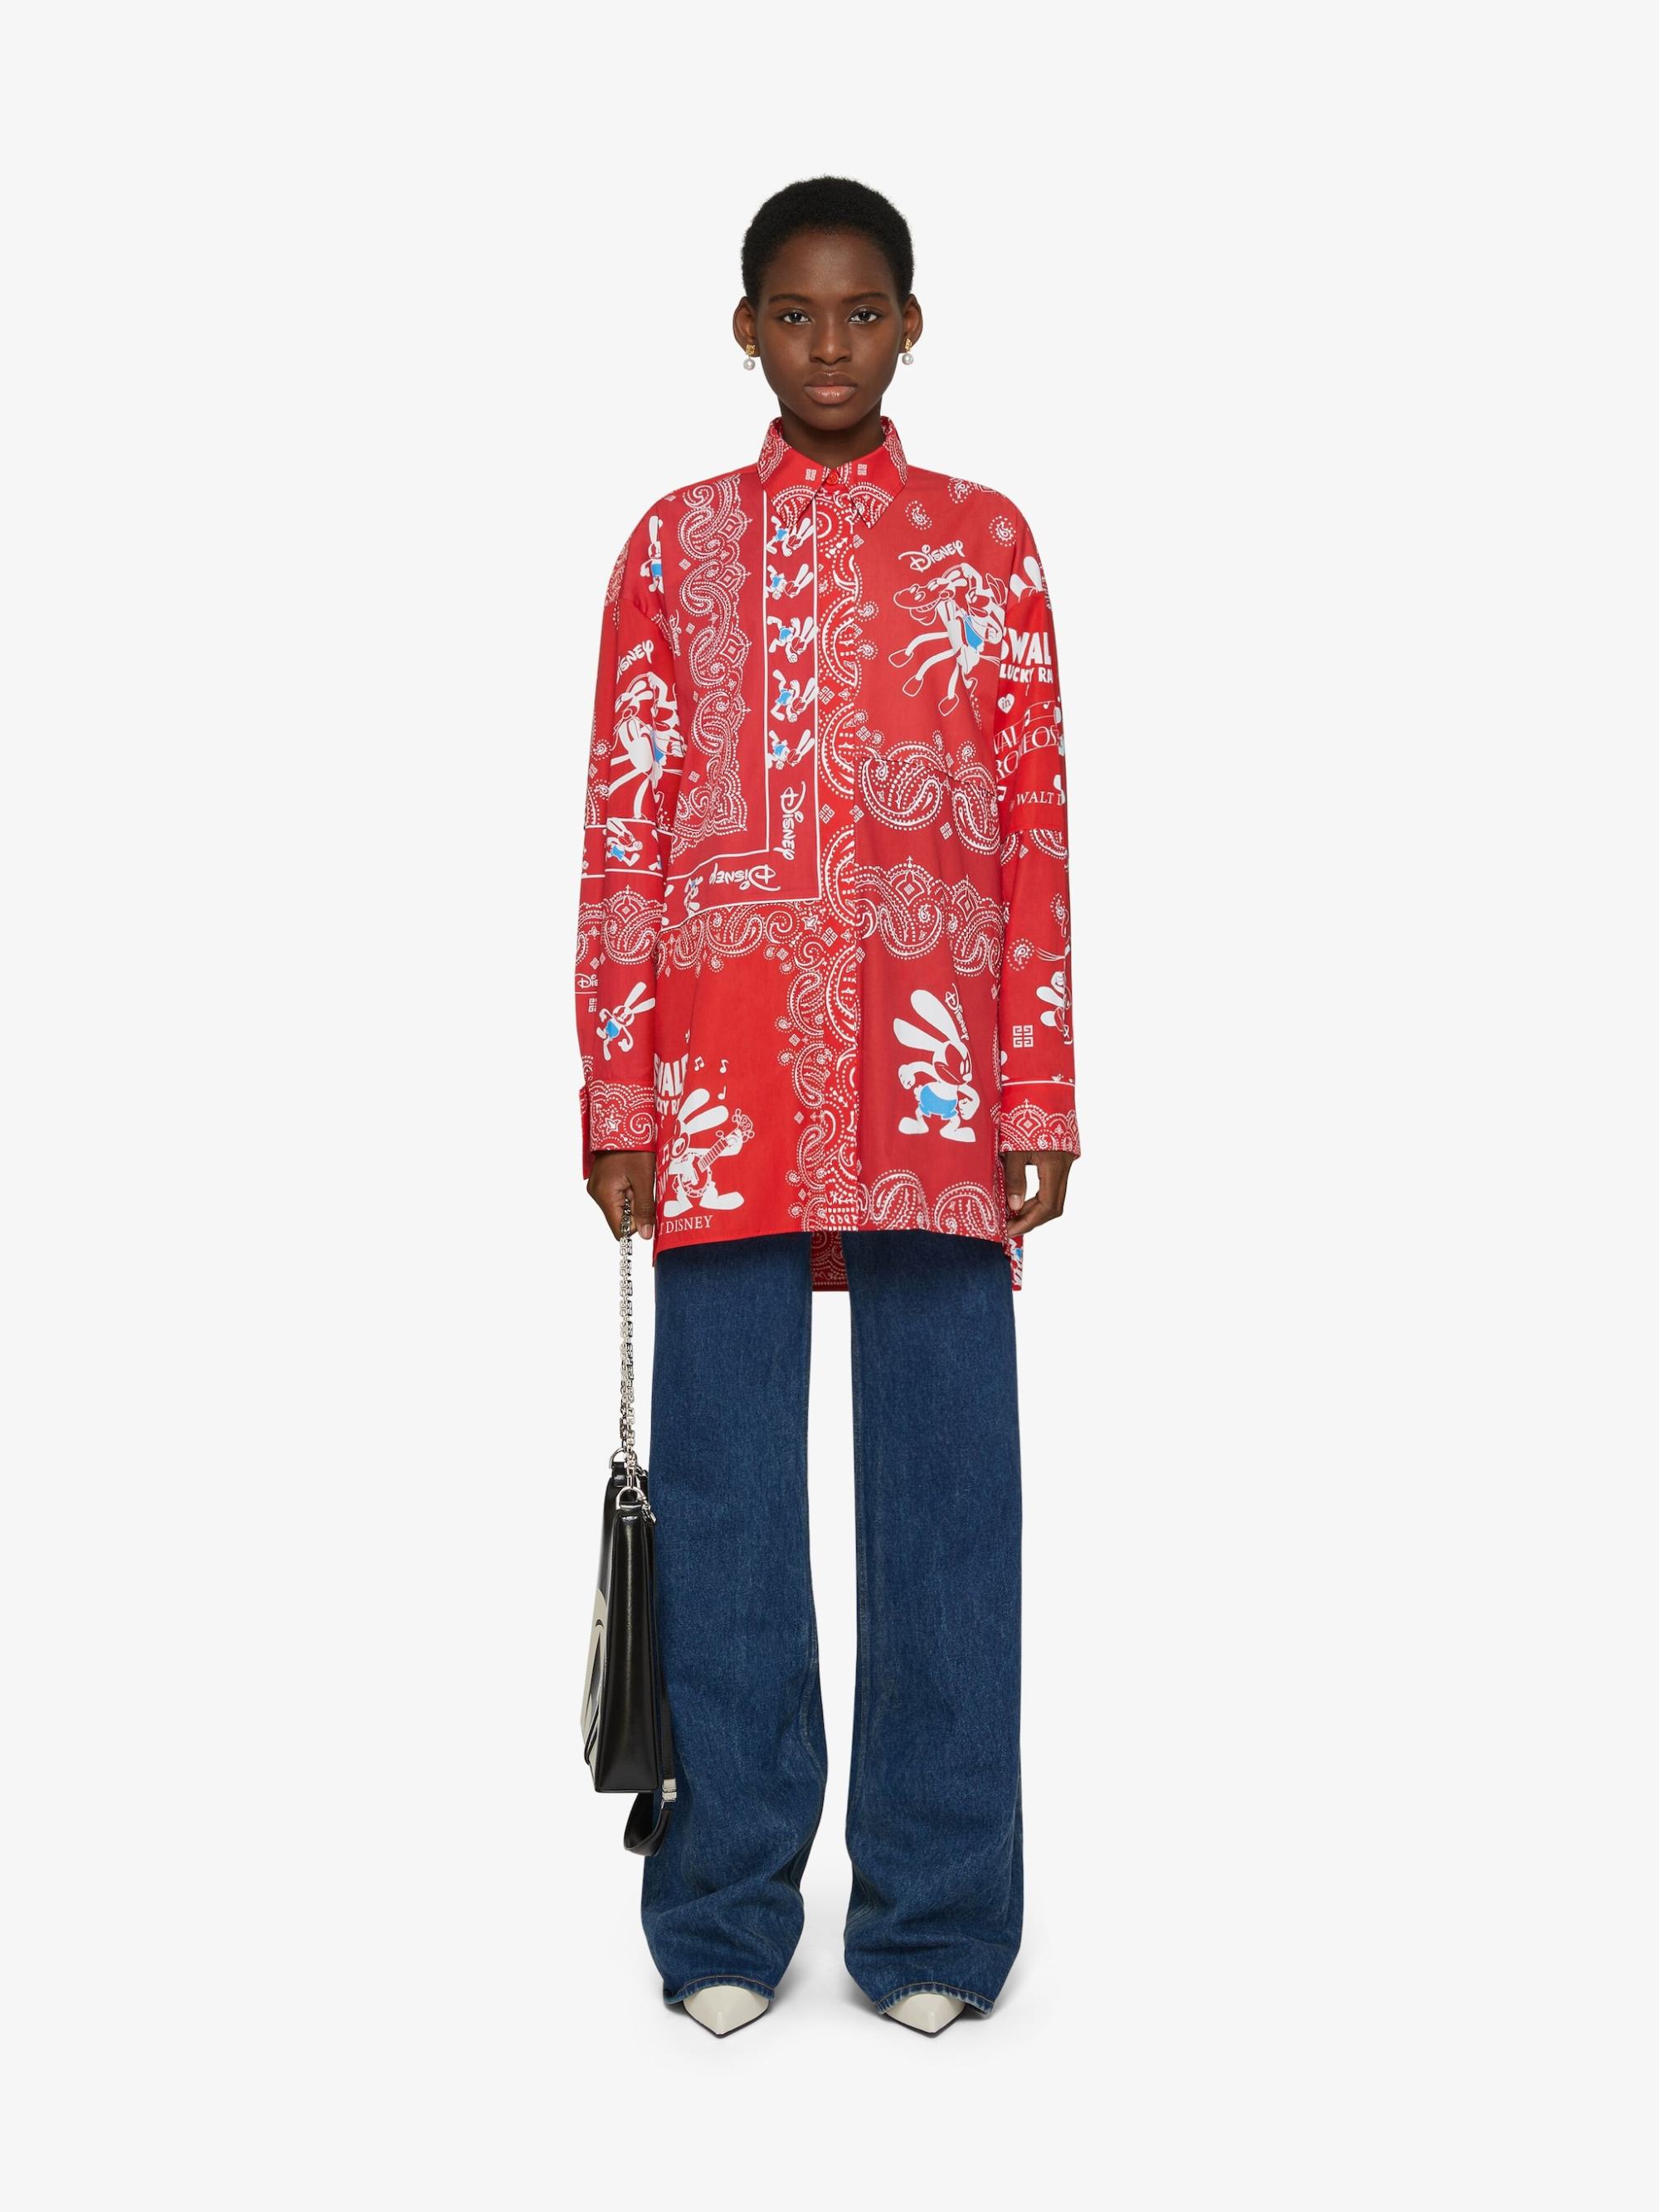 9 best Lunar New Year luxury fashion collections for 2023: from Gucci's  silk shirts and Louis Vuitton's classic red prints, to Dior's playful Year  of the Rabbit motif and Givenchy's cute Disney